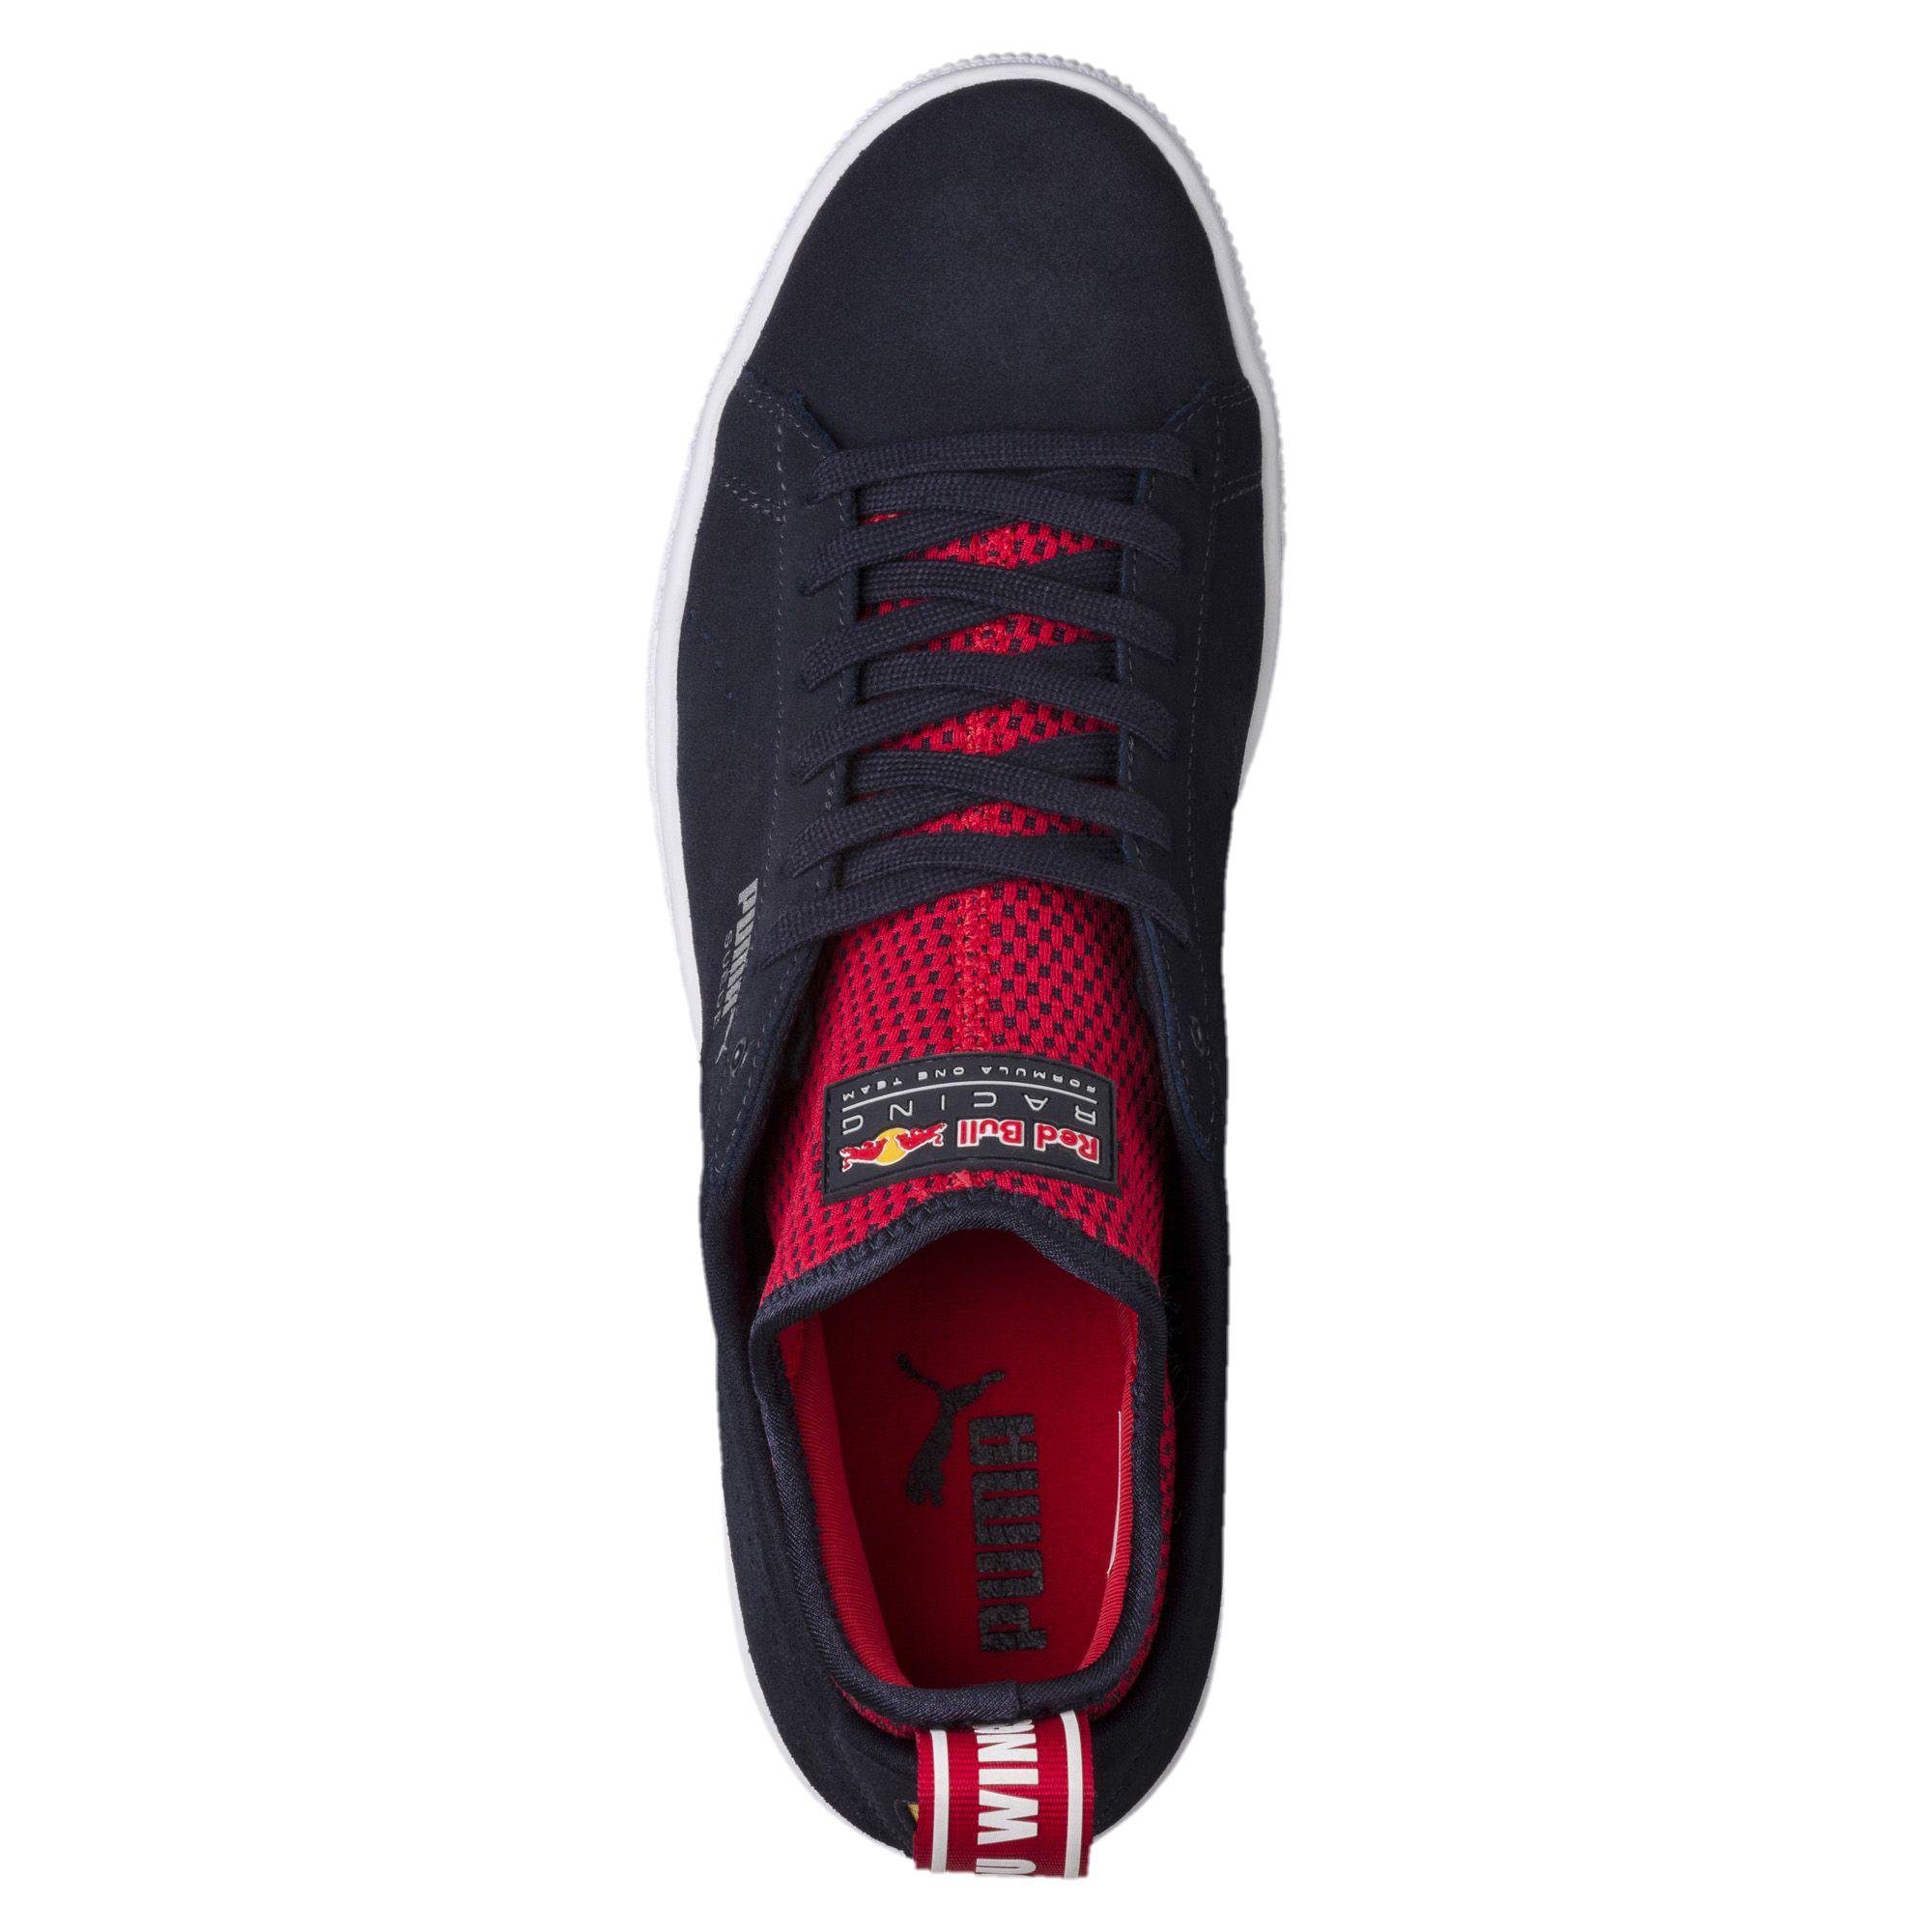 red puma racing shoes